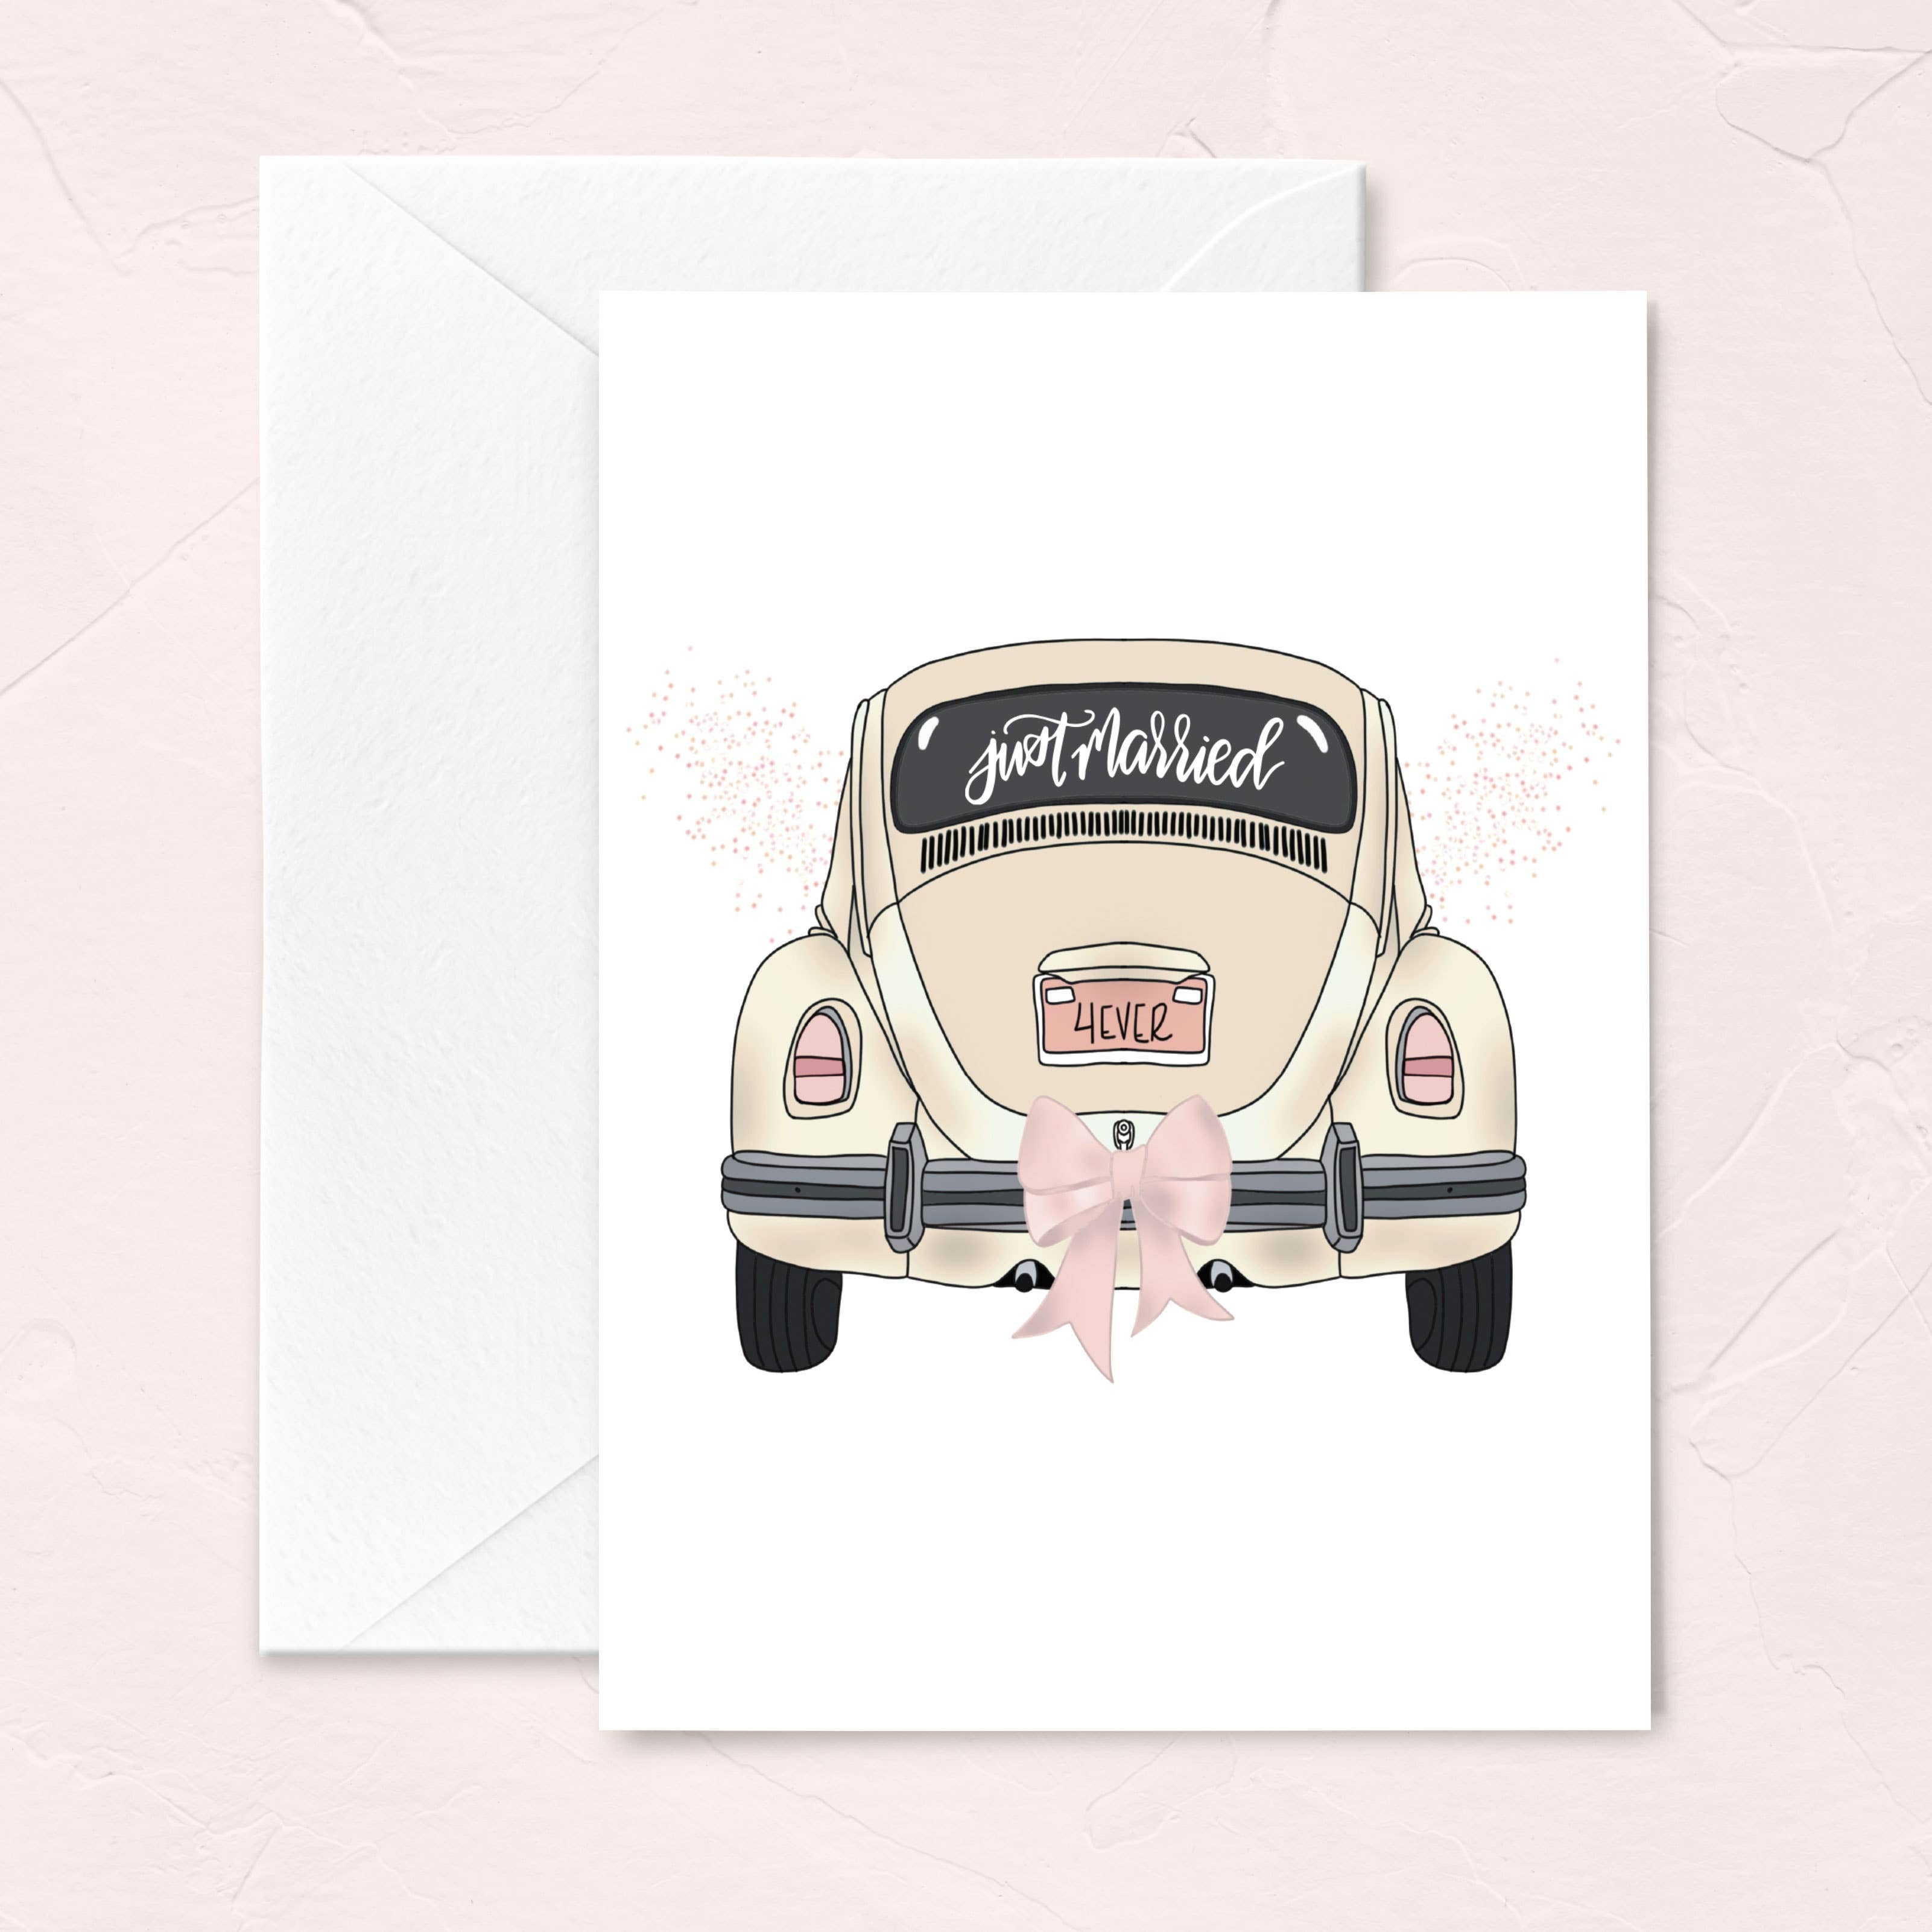 JUST MARRIED CARD